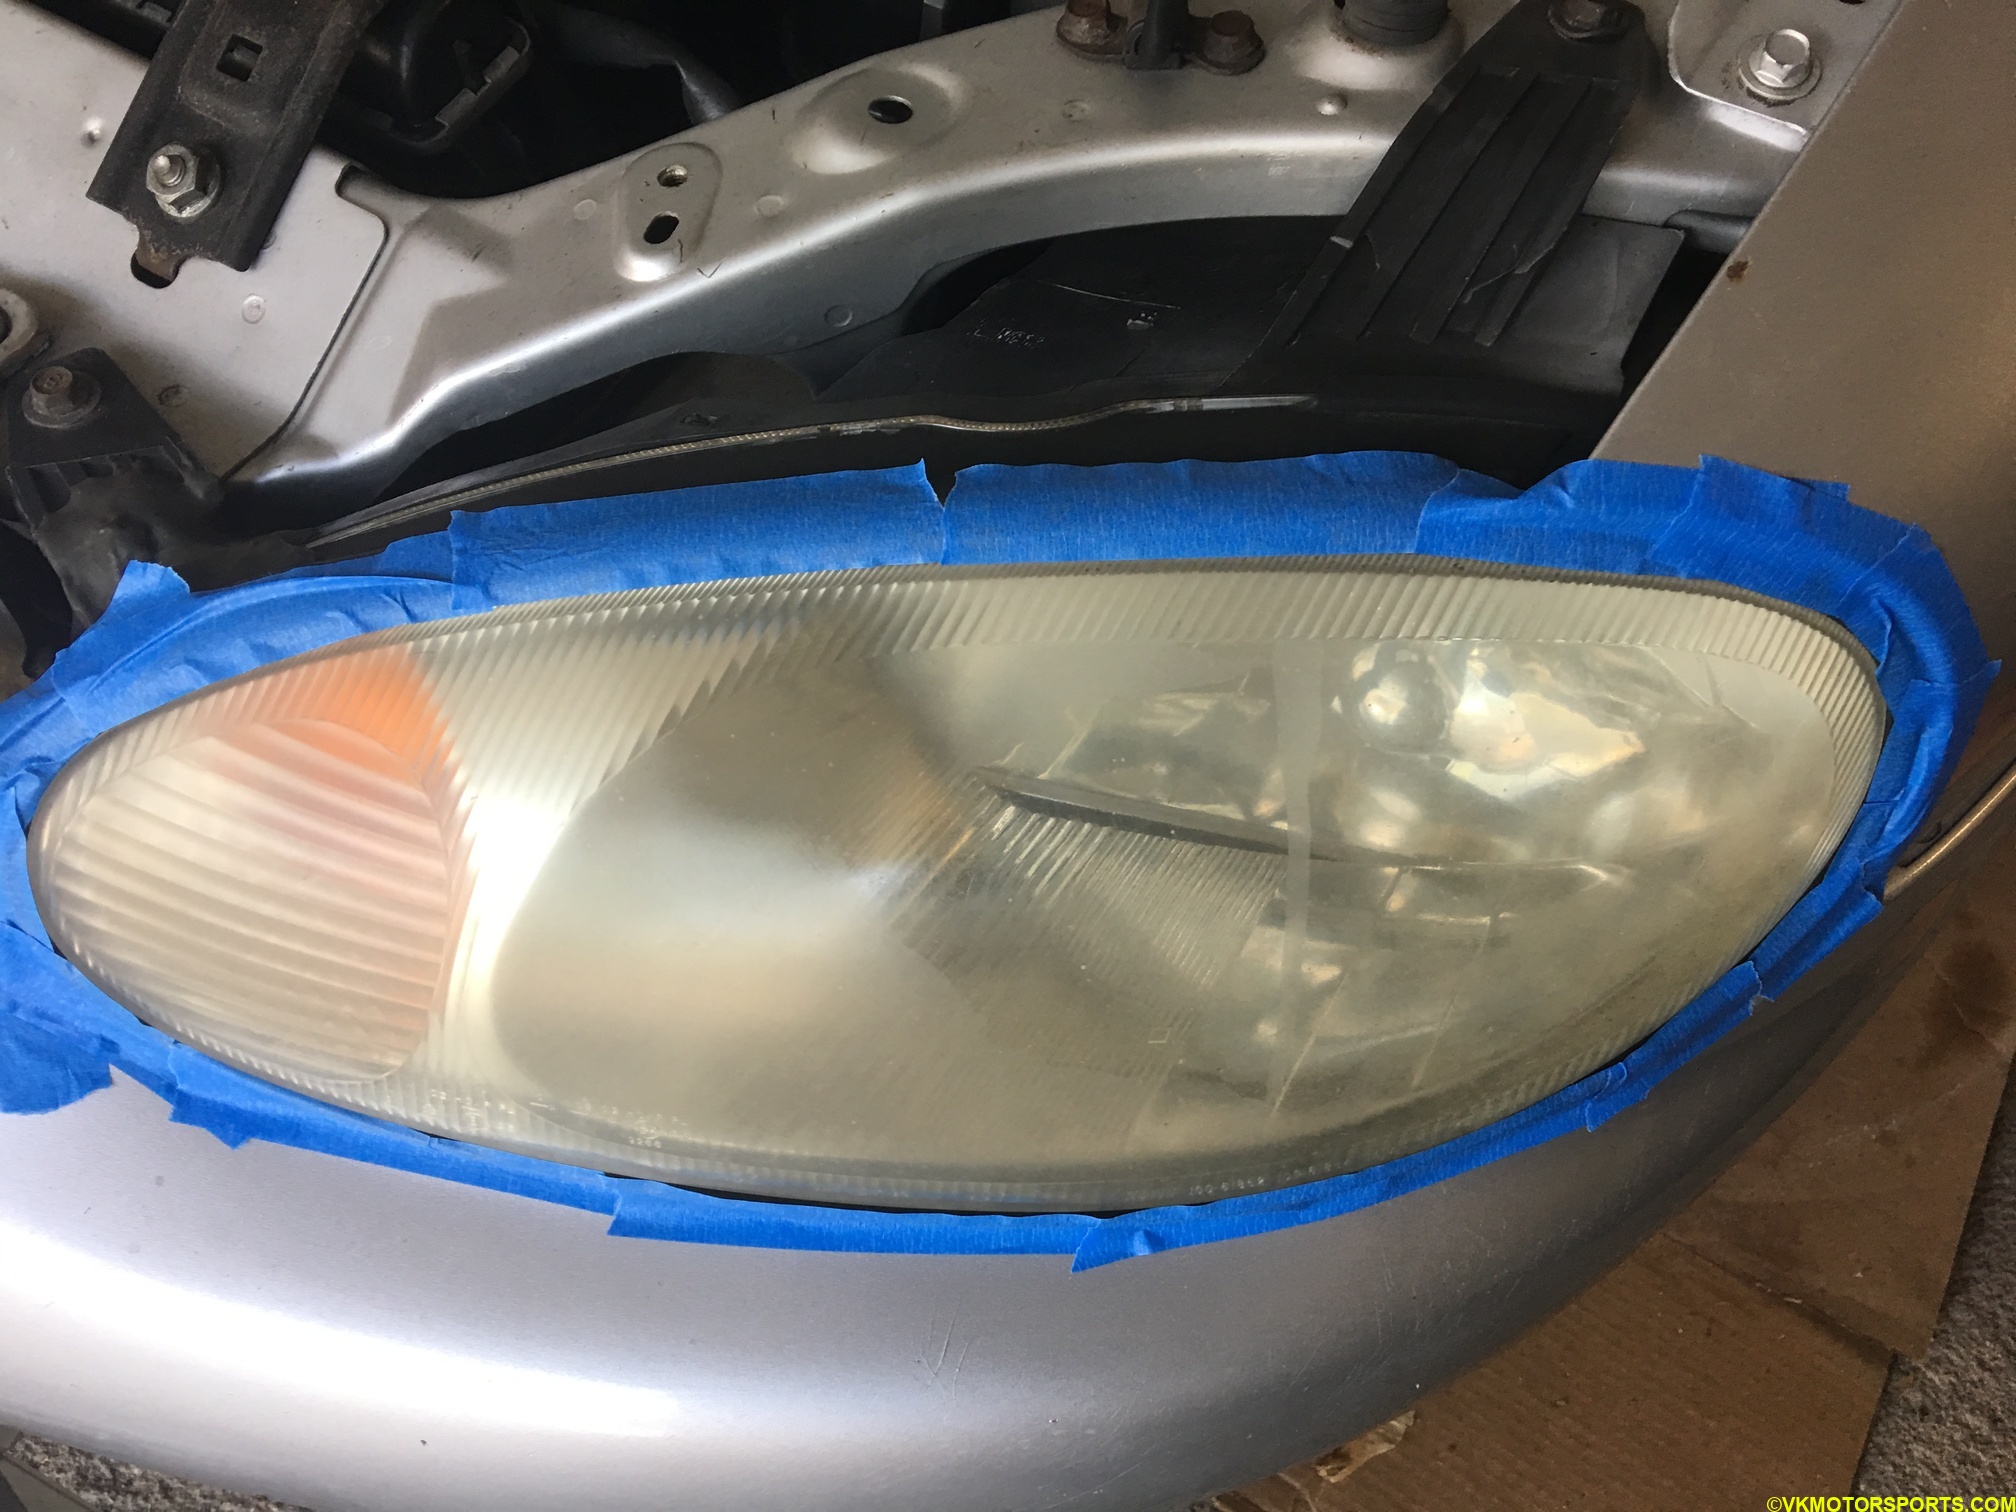 Driver-side headlight with masking tape